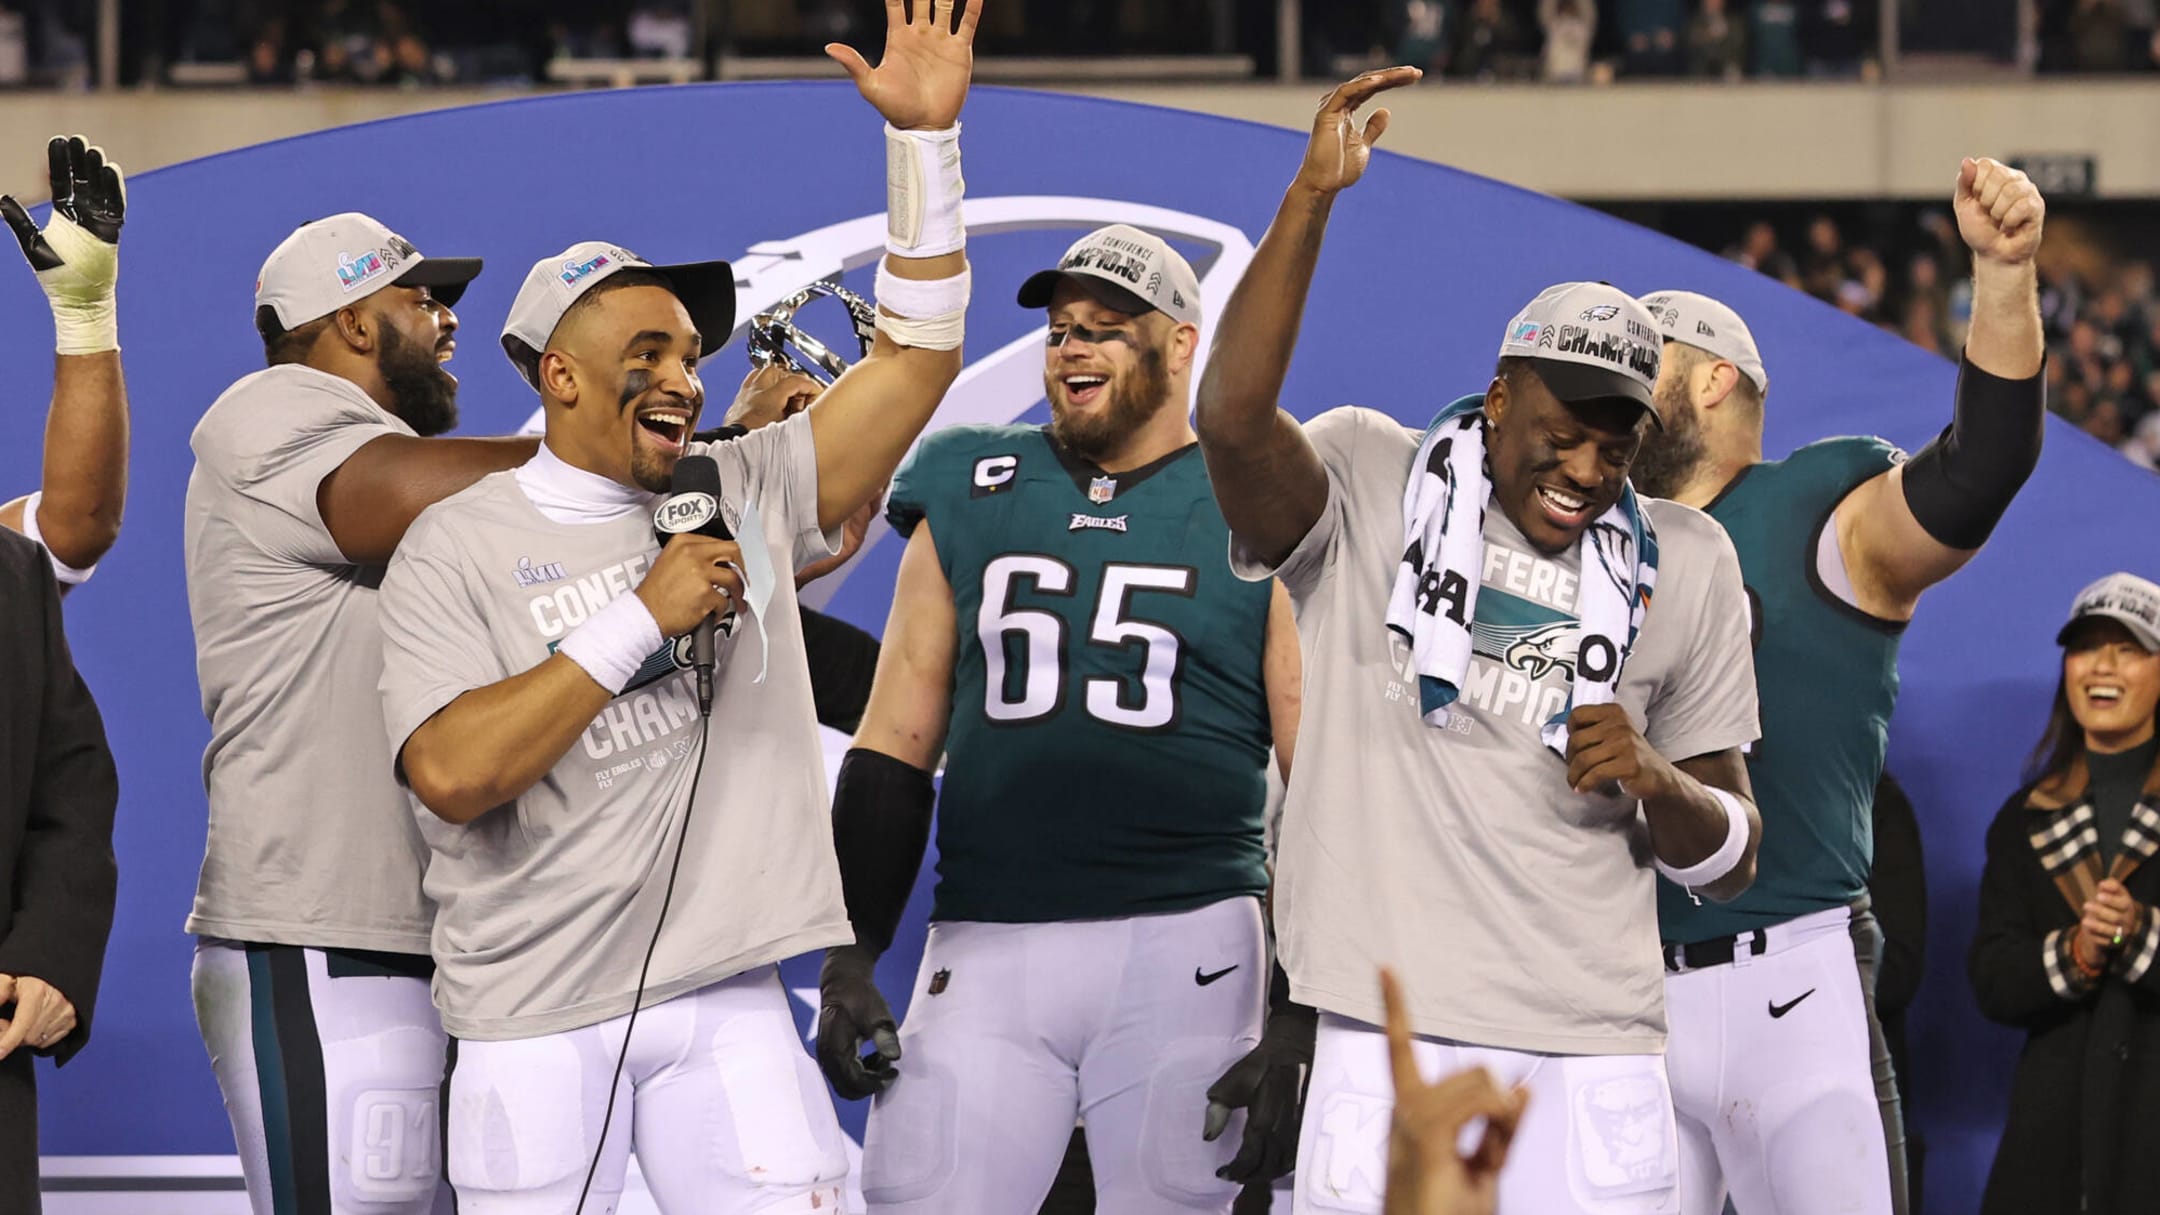 NFL on FOX - #FlyEaglesFly The Philadelphia Eagles are NFC East champions!